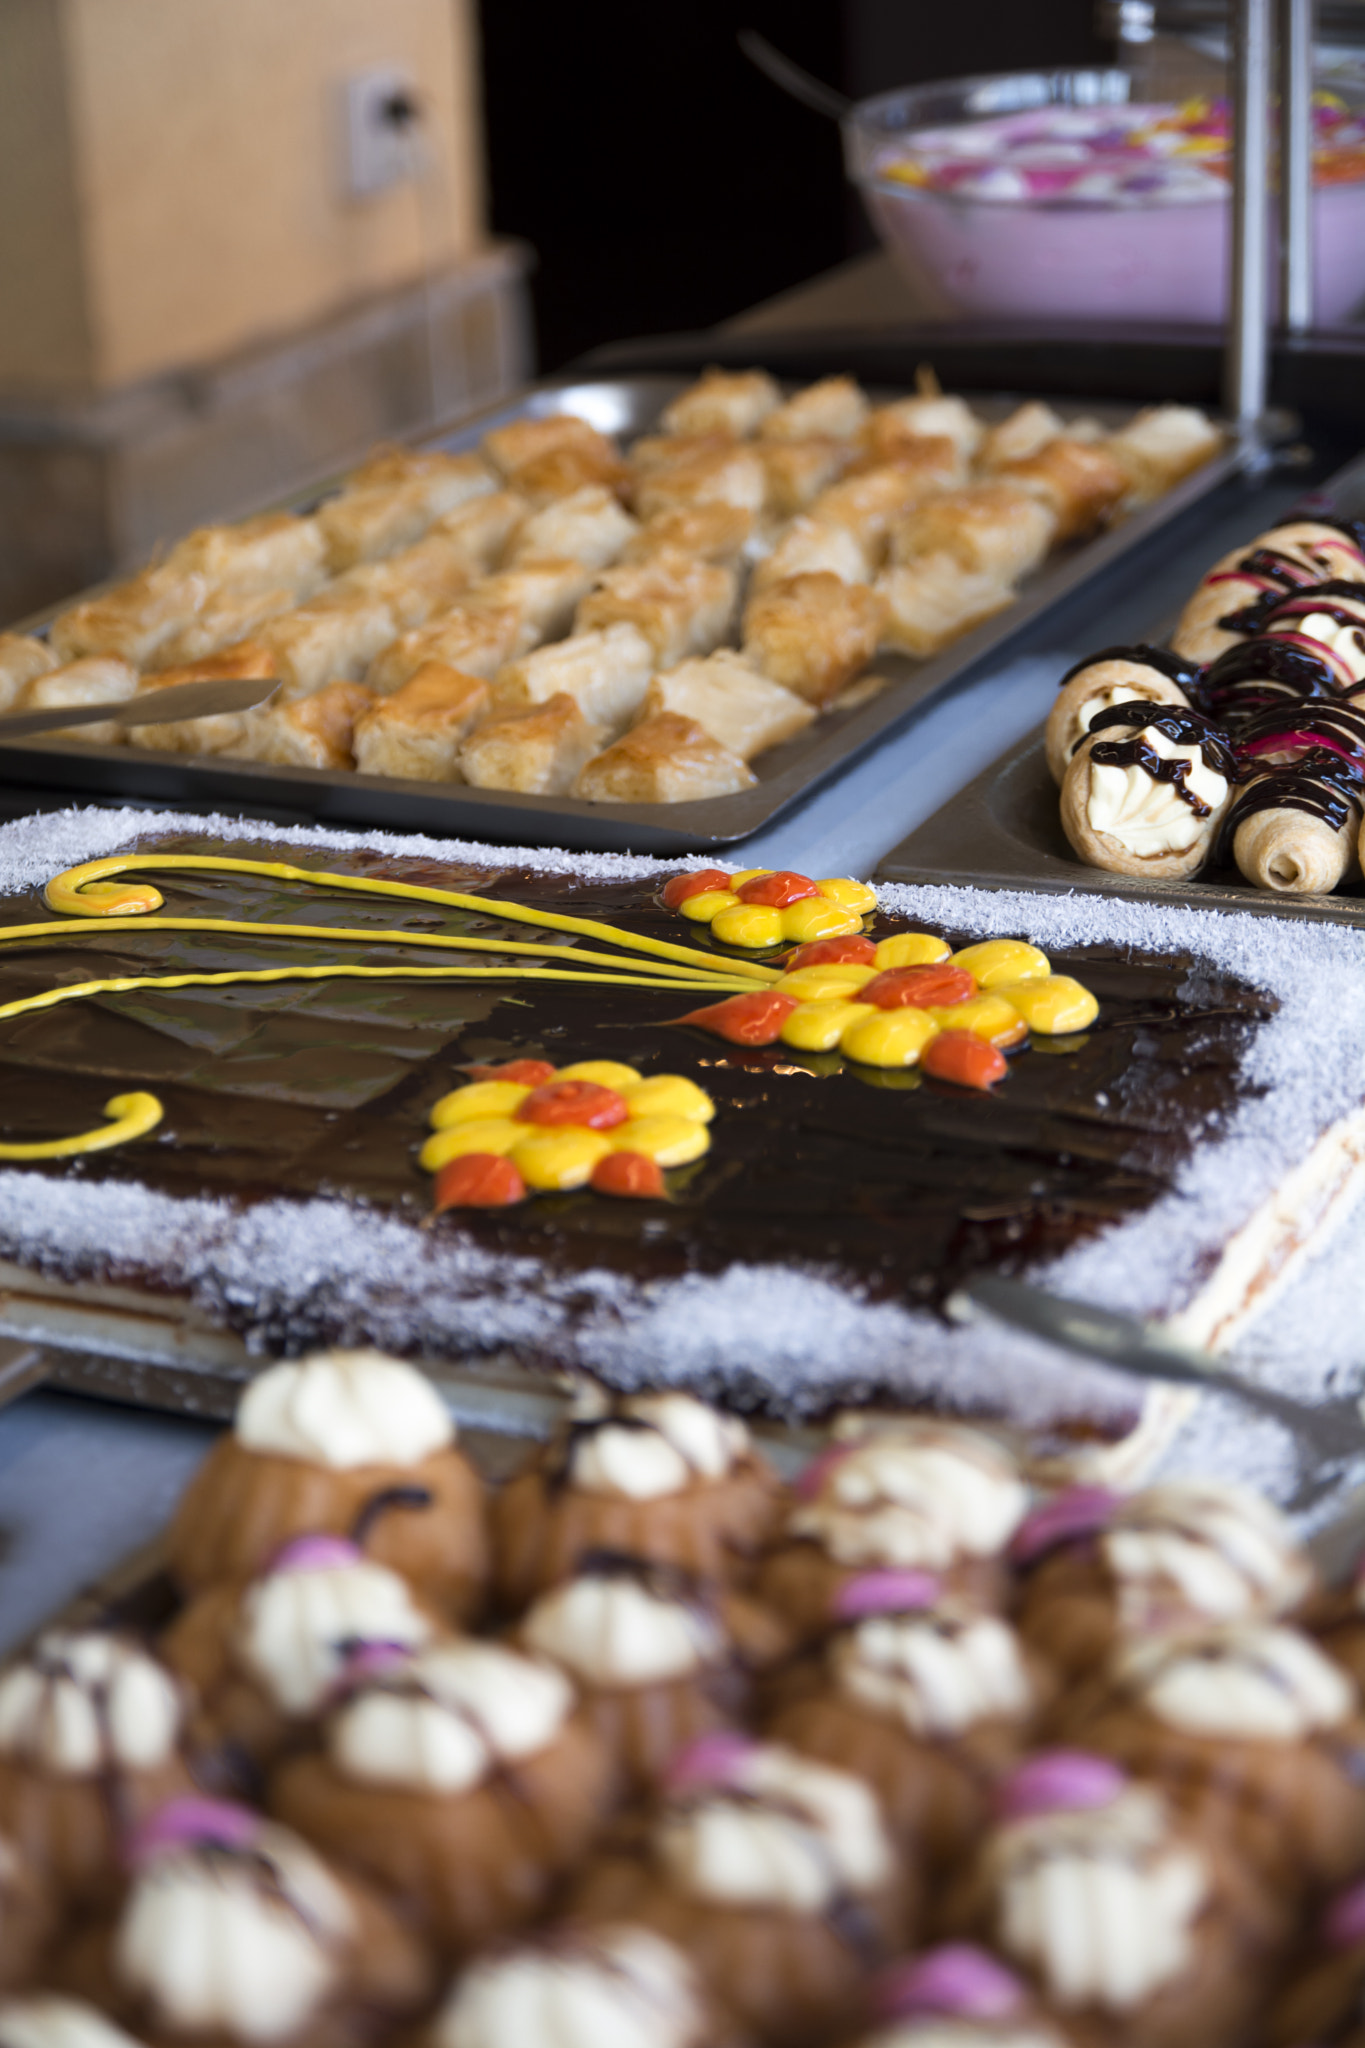 Nikon D5200 + Tamron SP AF 17-50mm F2.8 XR Di II VC LD Aspherical (IF) sample photo. Pastry buffet photography